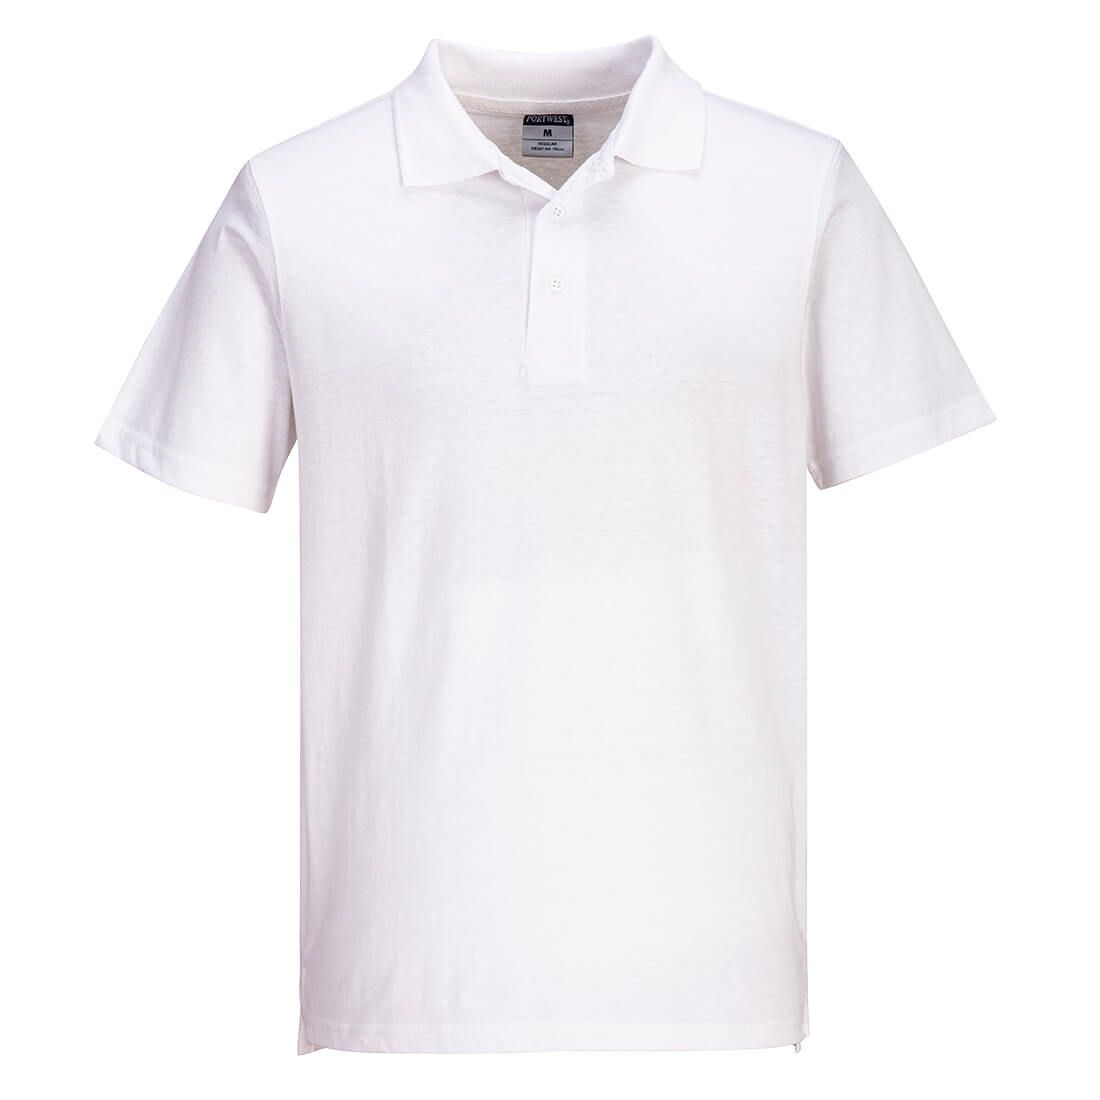 Portwest Lightweight Jersey Polo Shirt (48 in a box)